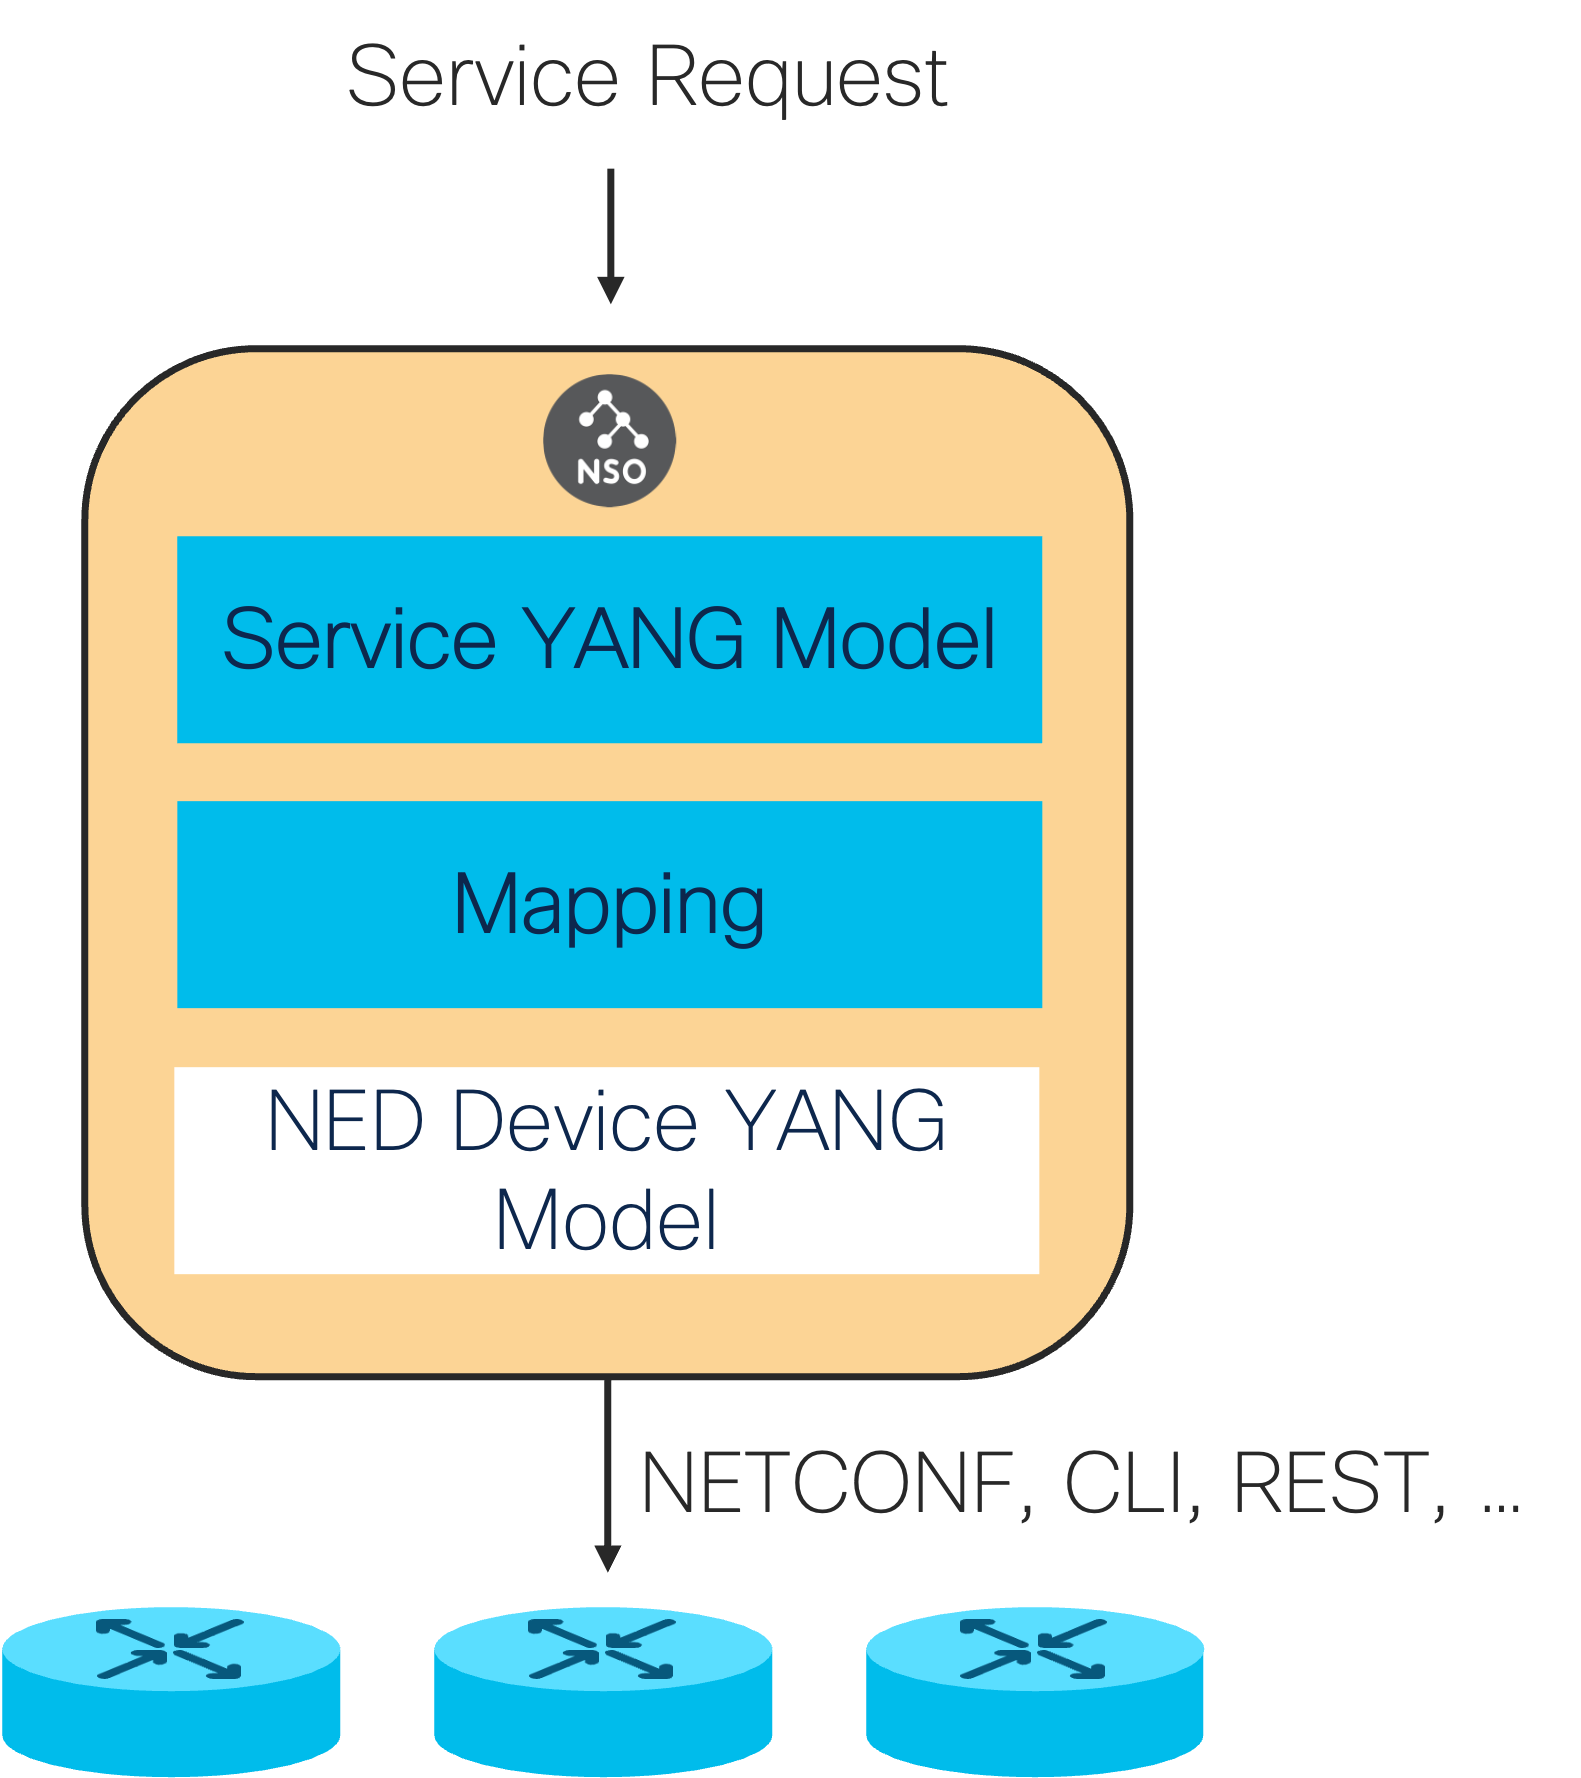 Service model and mapping